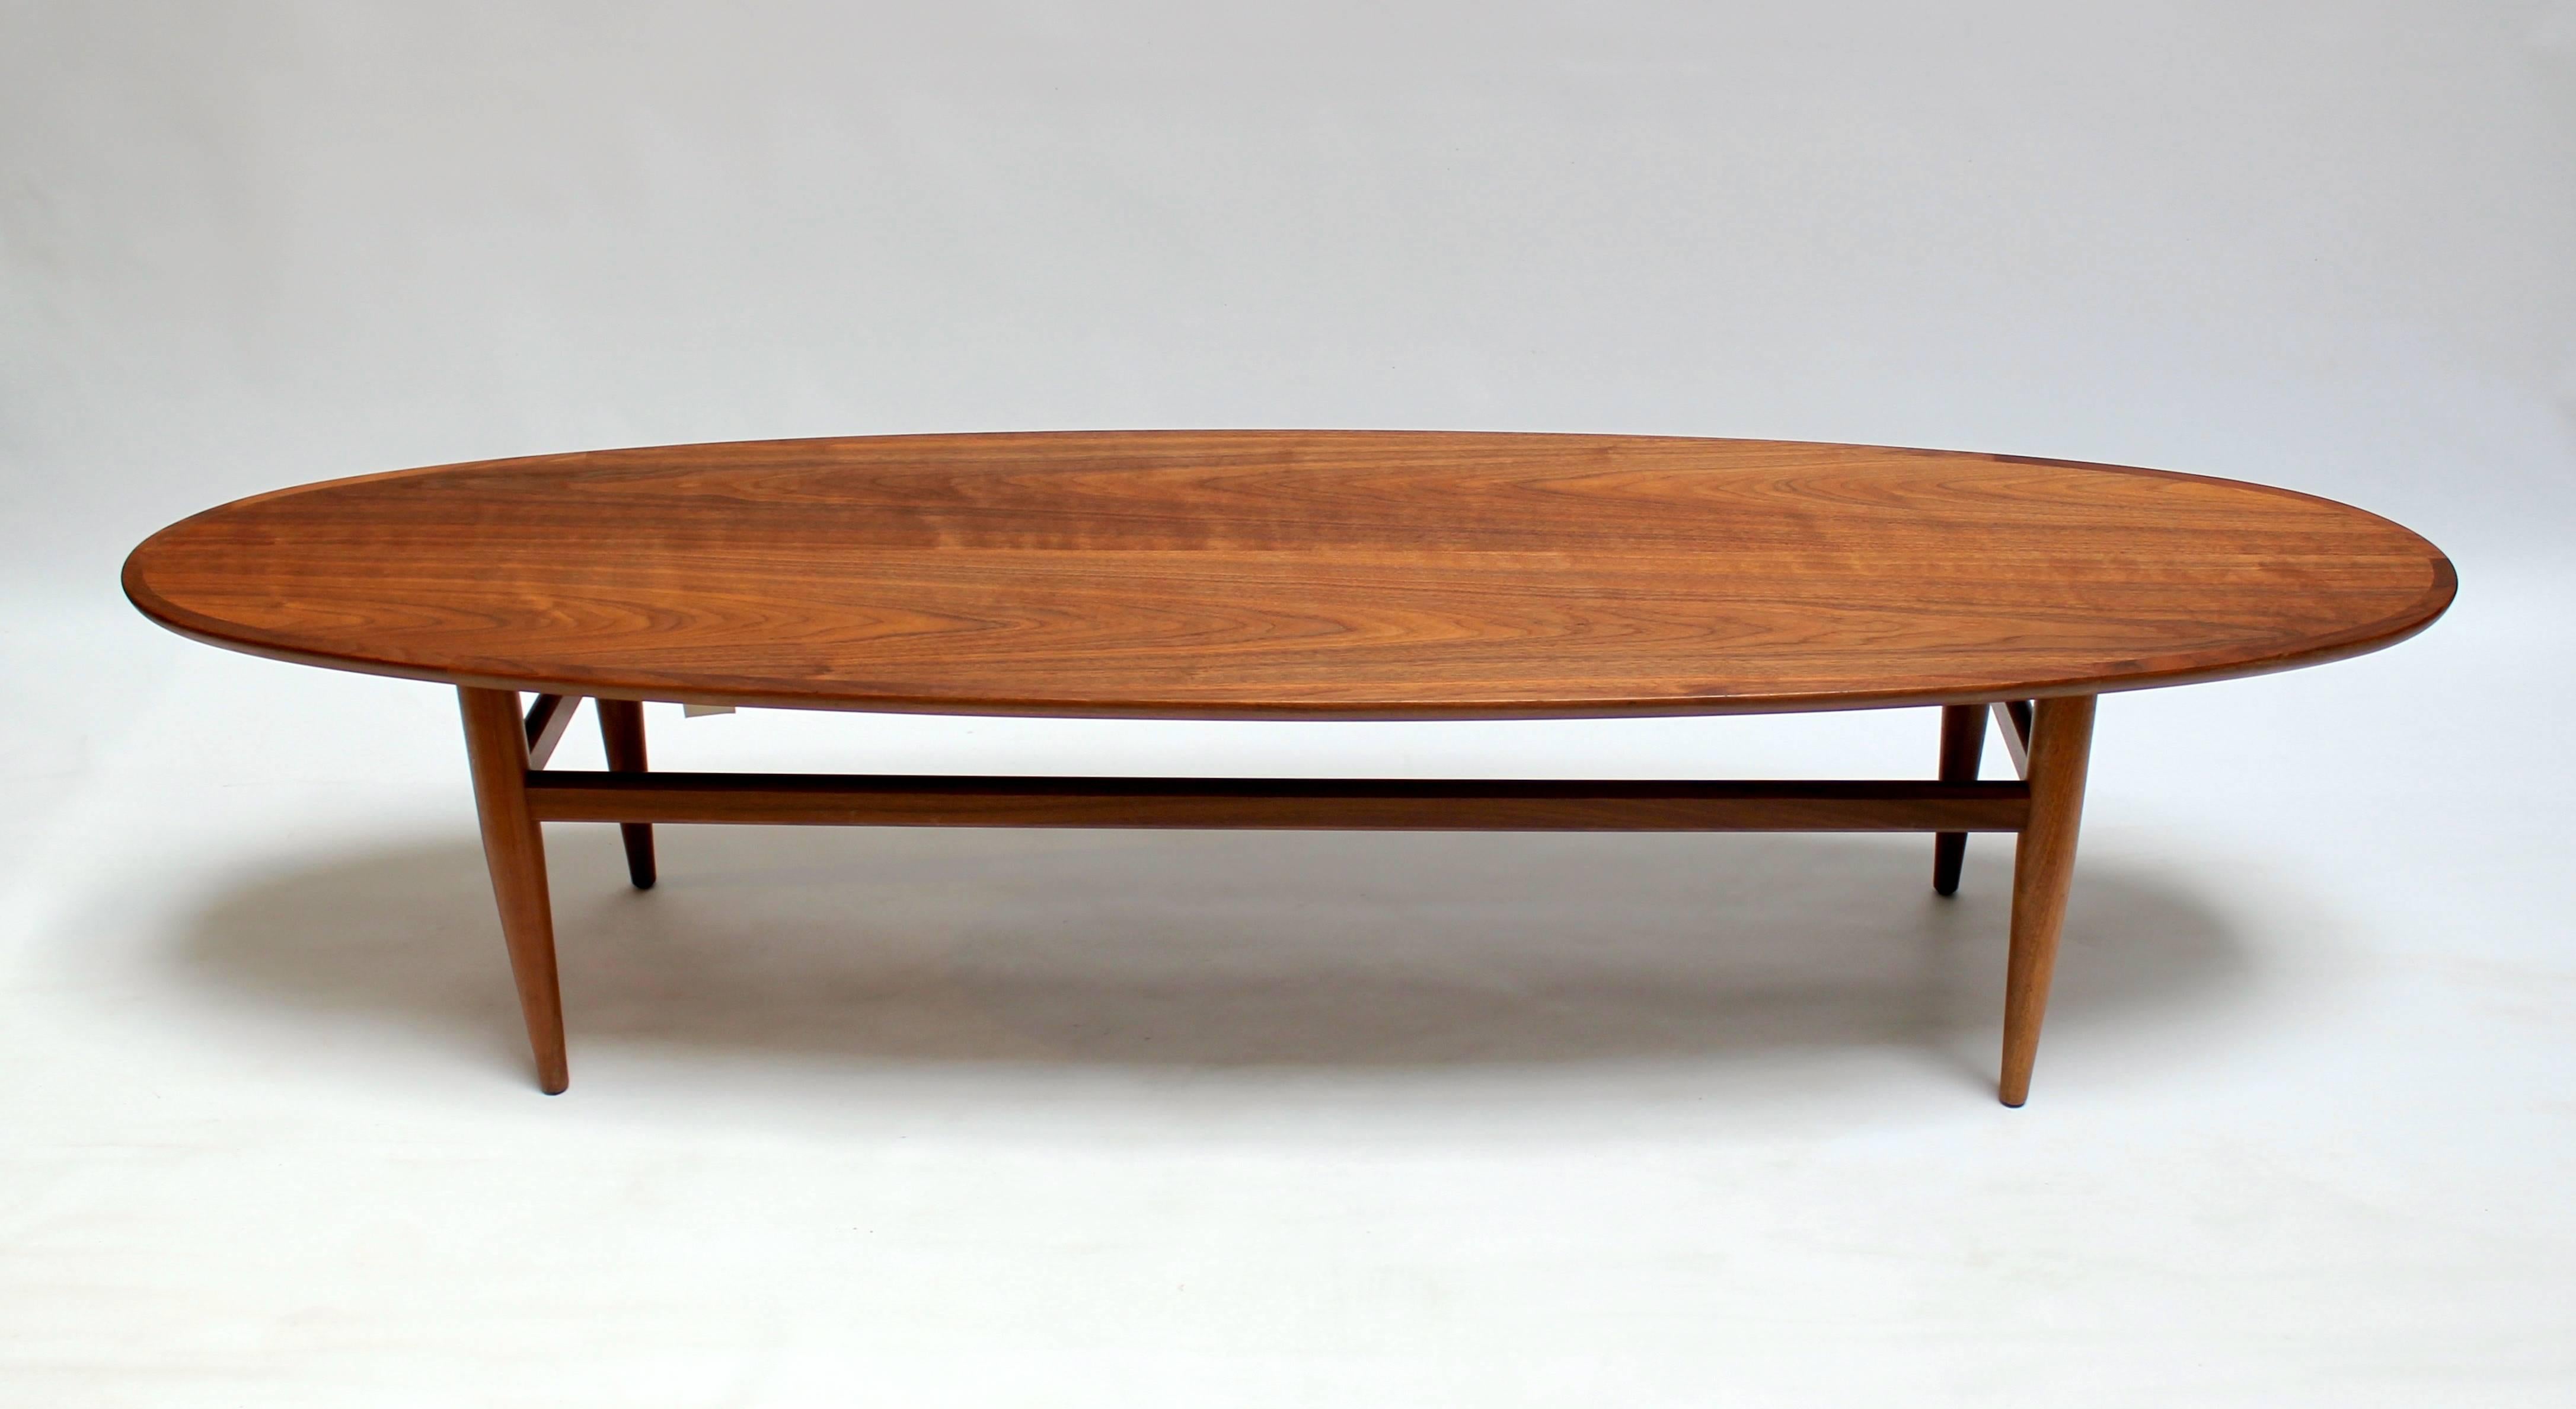 Mid-Century Modern walnut surfboard coffee table by Heritage. Slightly narrower than the standard surfboard coffee table, this piece more delicate and graceful lines than most similar pieces. The top has been professionally refinished, and is in